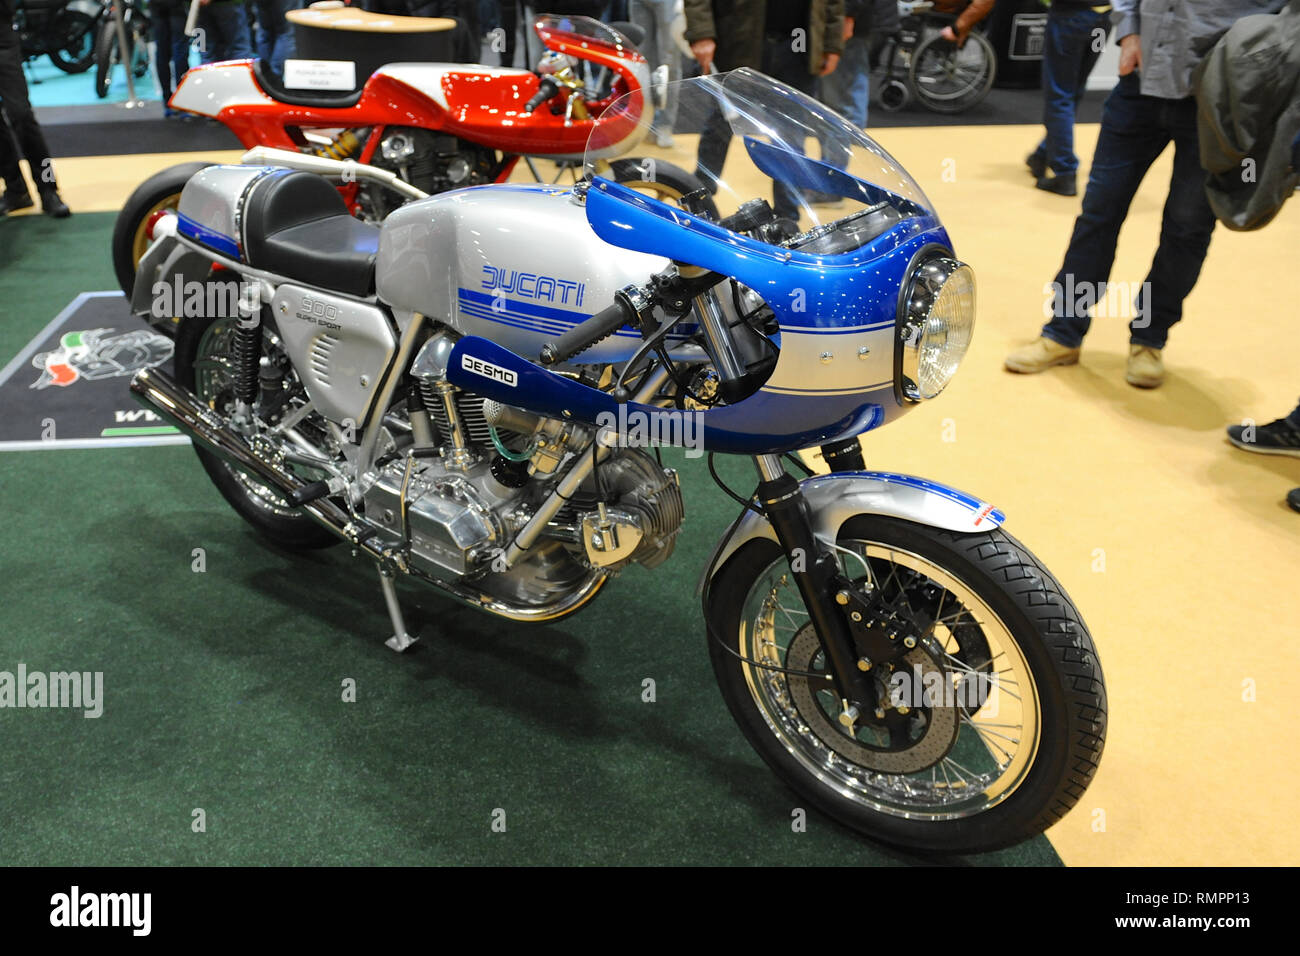 London, UK. 15th Feb, 2019. A vintage Ducati 900cc Supersport motorbike on display at the Carole Nash MCN London Motorcycle Show which is taking place at ExCel London, United Kingdom.  The show features a vast variety of wheeled transport from motorbikes, scooters and superbikes to customised one-off choppers from the world’s top motorcycle manufacturers, Around 40,000 fans are expected to visit the show, ranging from two wheel enthusiasts to baby boomer, born again bikers looking for their ultimate motorcycle for a dream roadtrip. Credit: Michael Preston/Alamy Live News Stock Photo